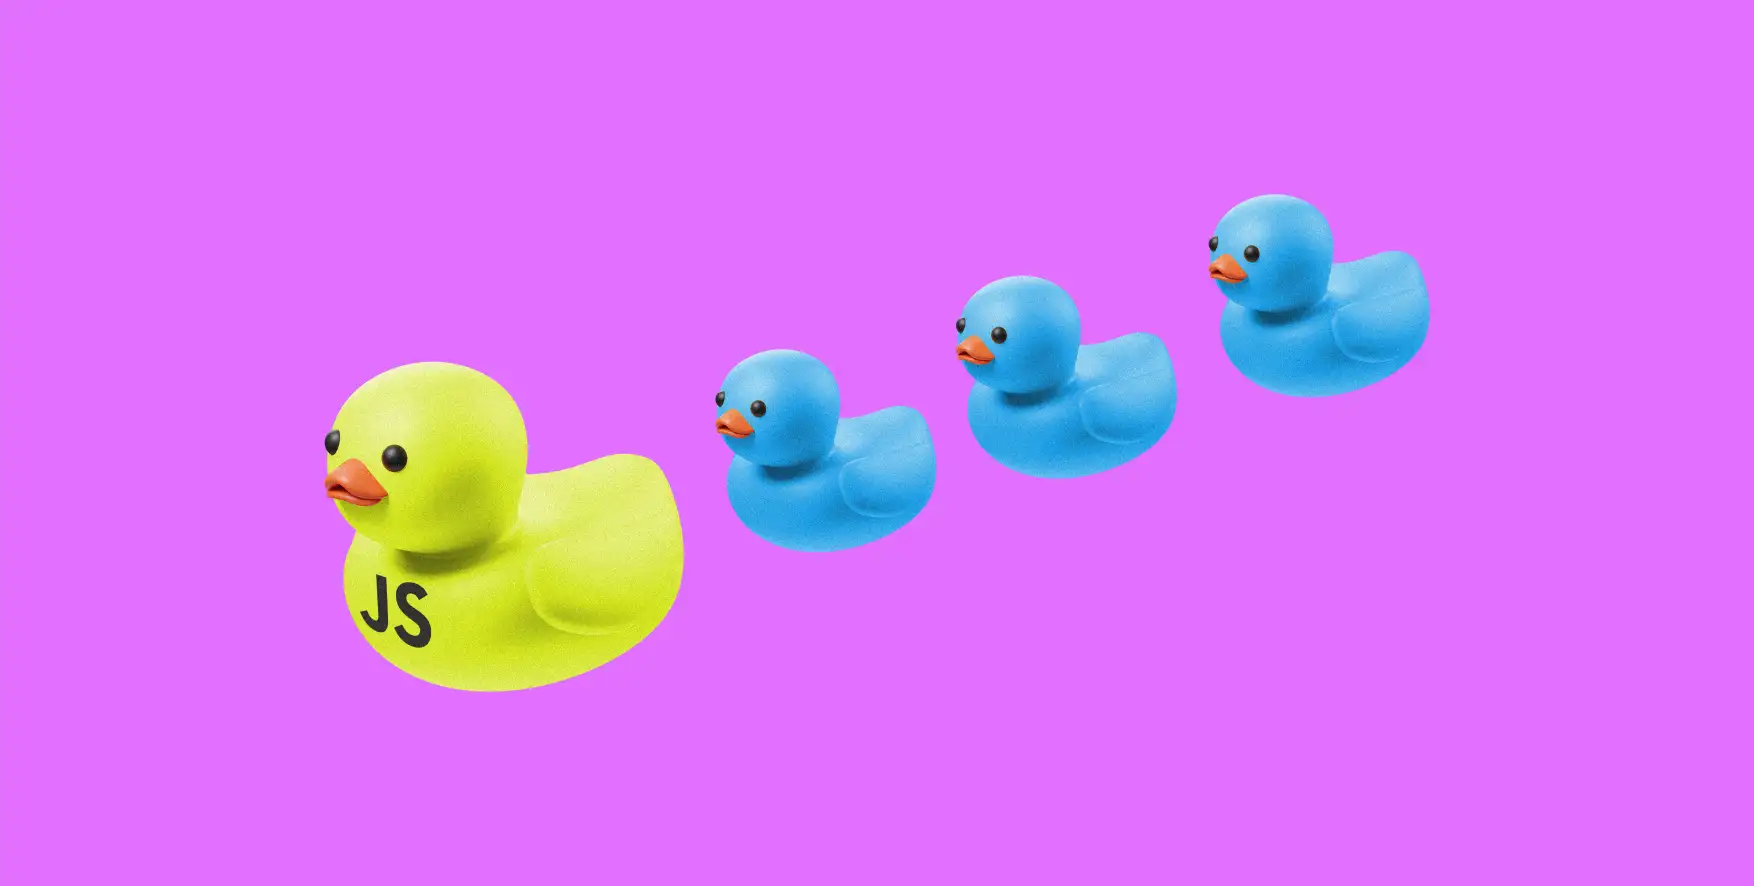 yellow duck with abbreviation JS and three blue ducklings